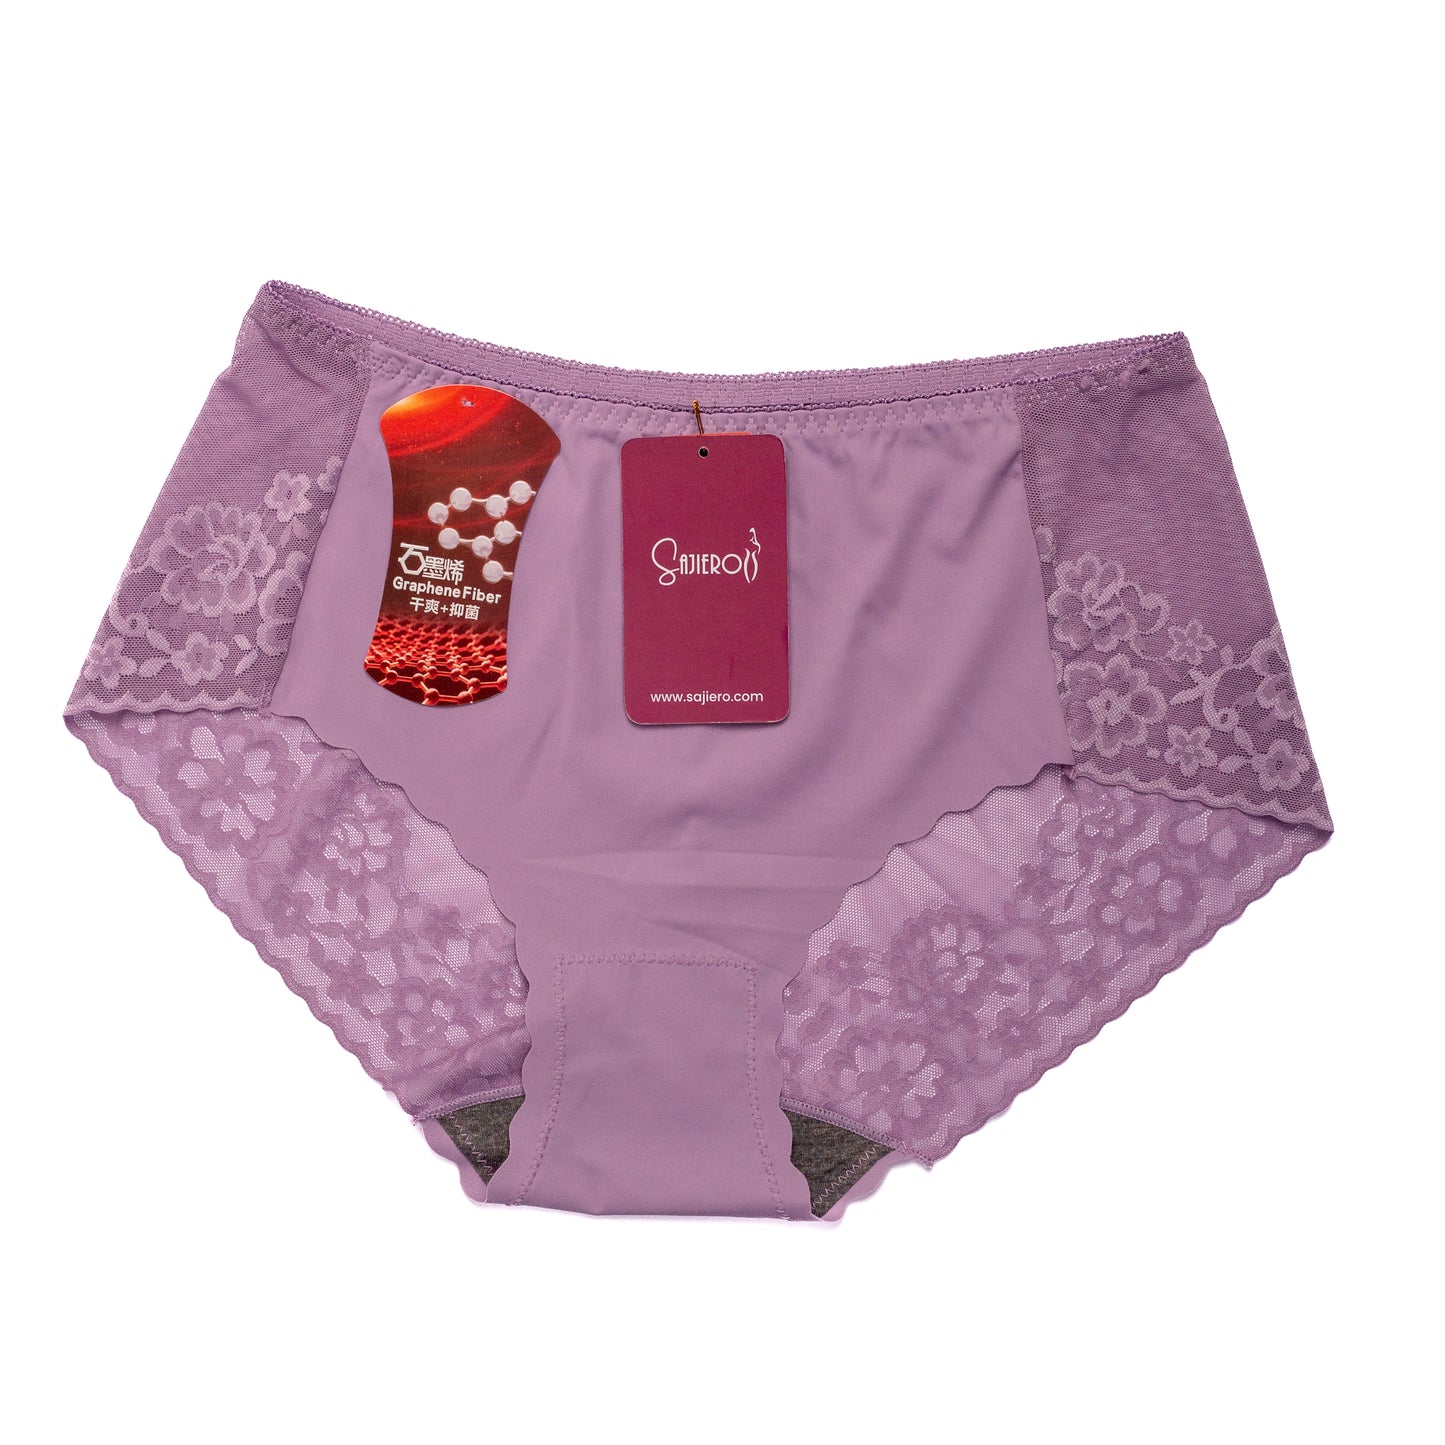 Cosmos Embroidery Net Panty